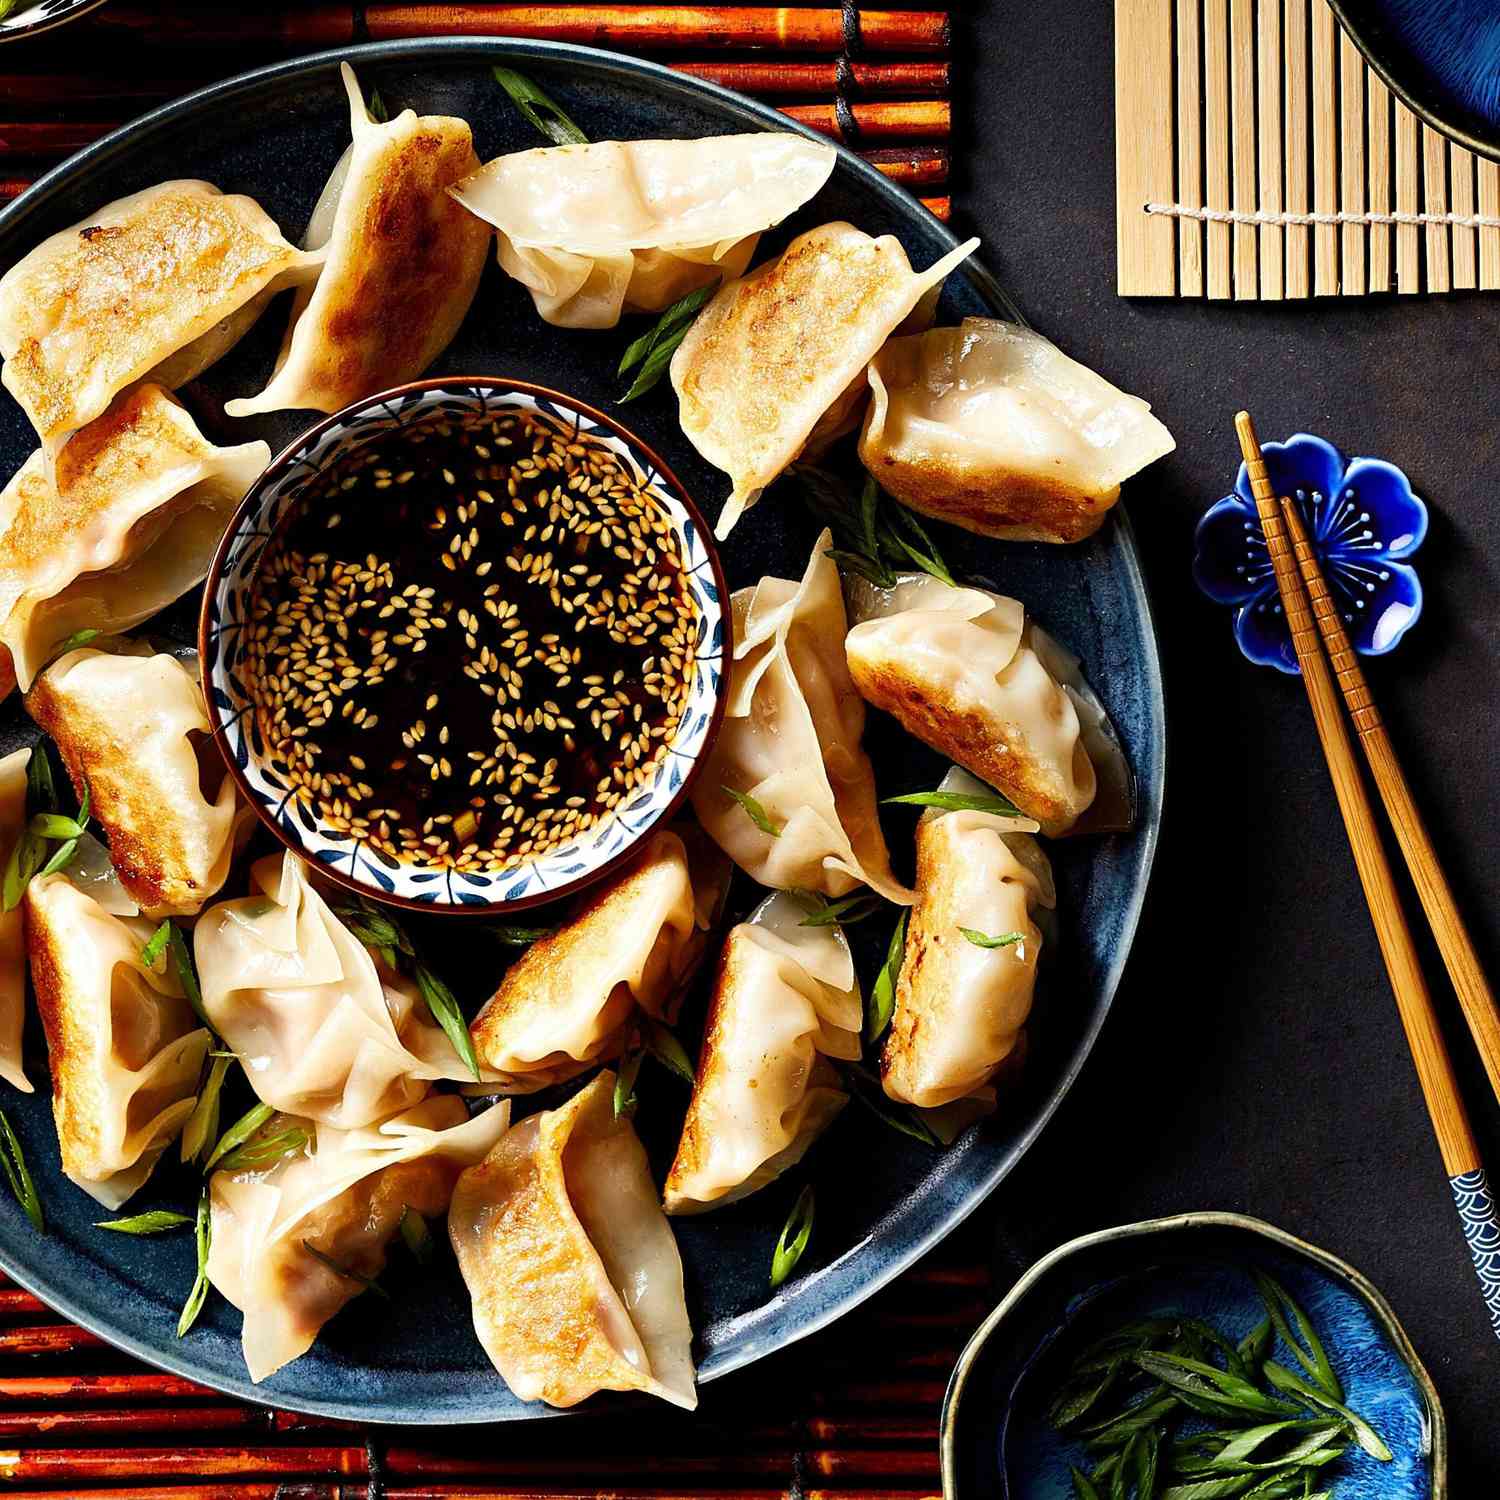 Dumplings on a blue platters surrounding a small bowl of dipping sauce